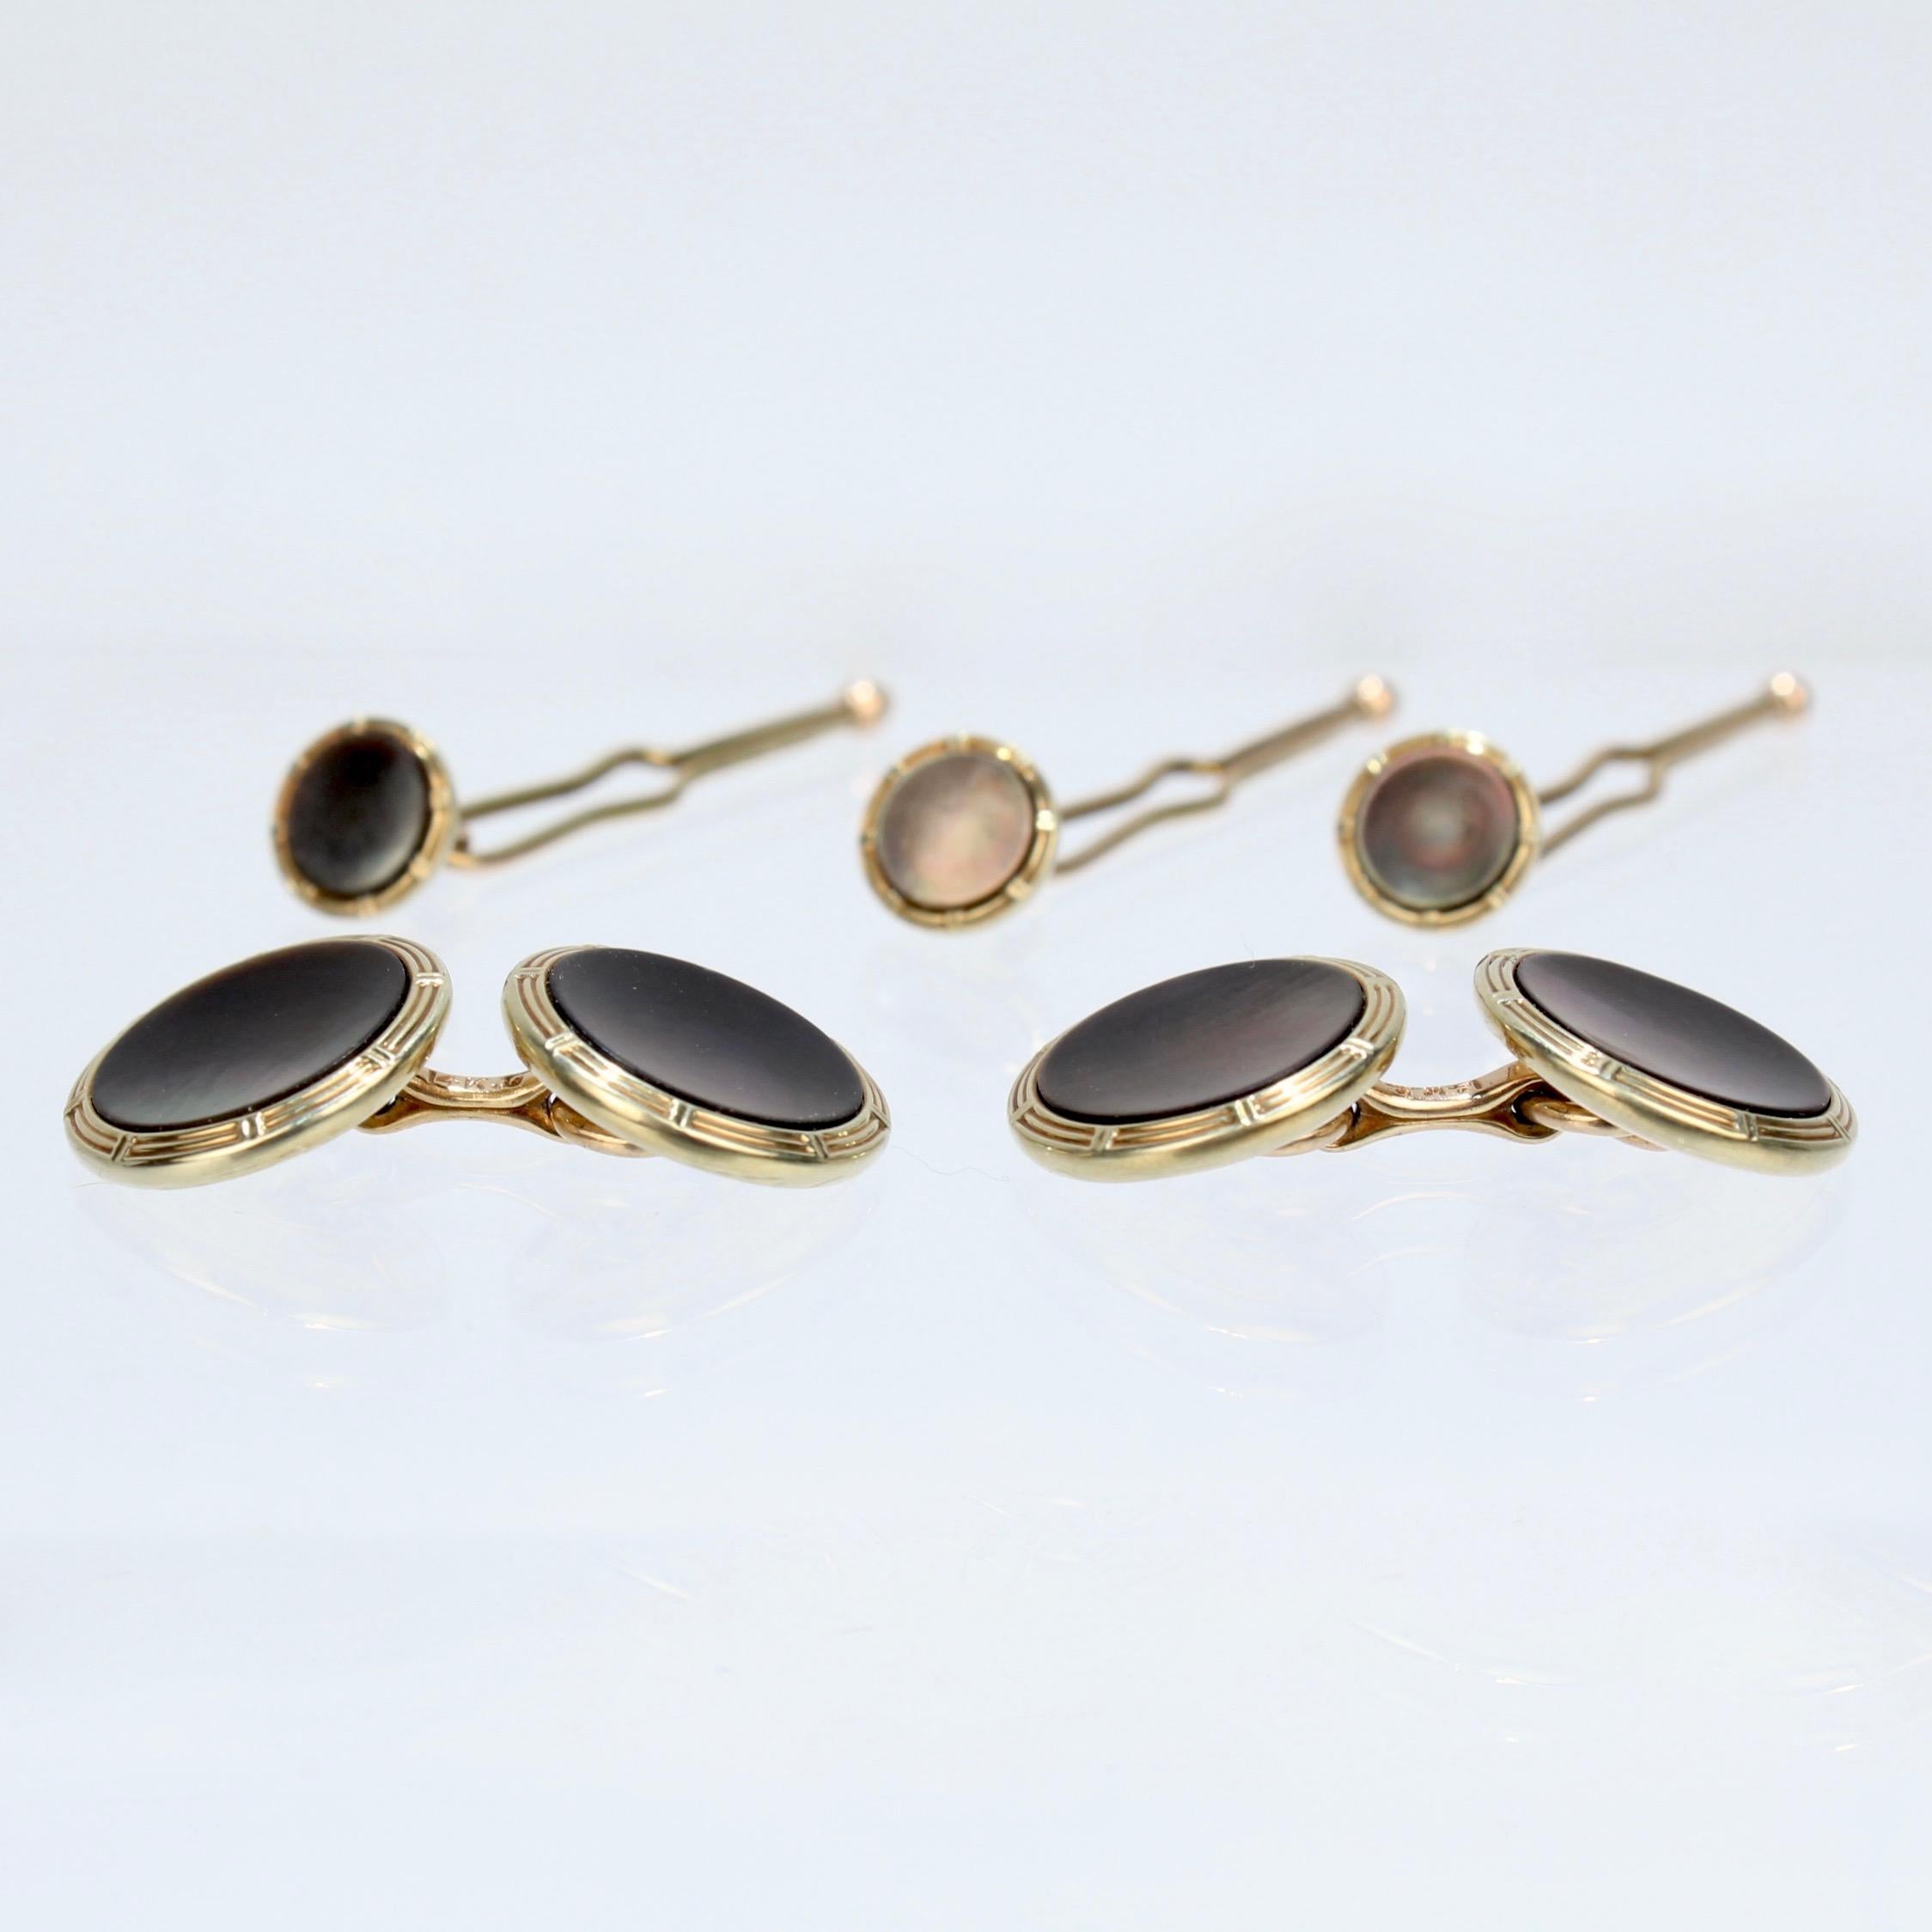 Glorious Krementz cuff links Mother of Pearl Pearl and platinum!